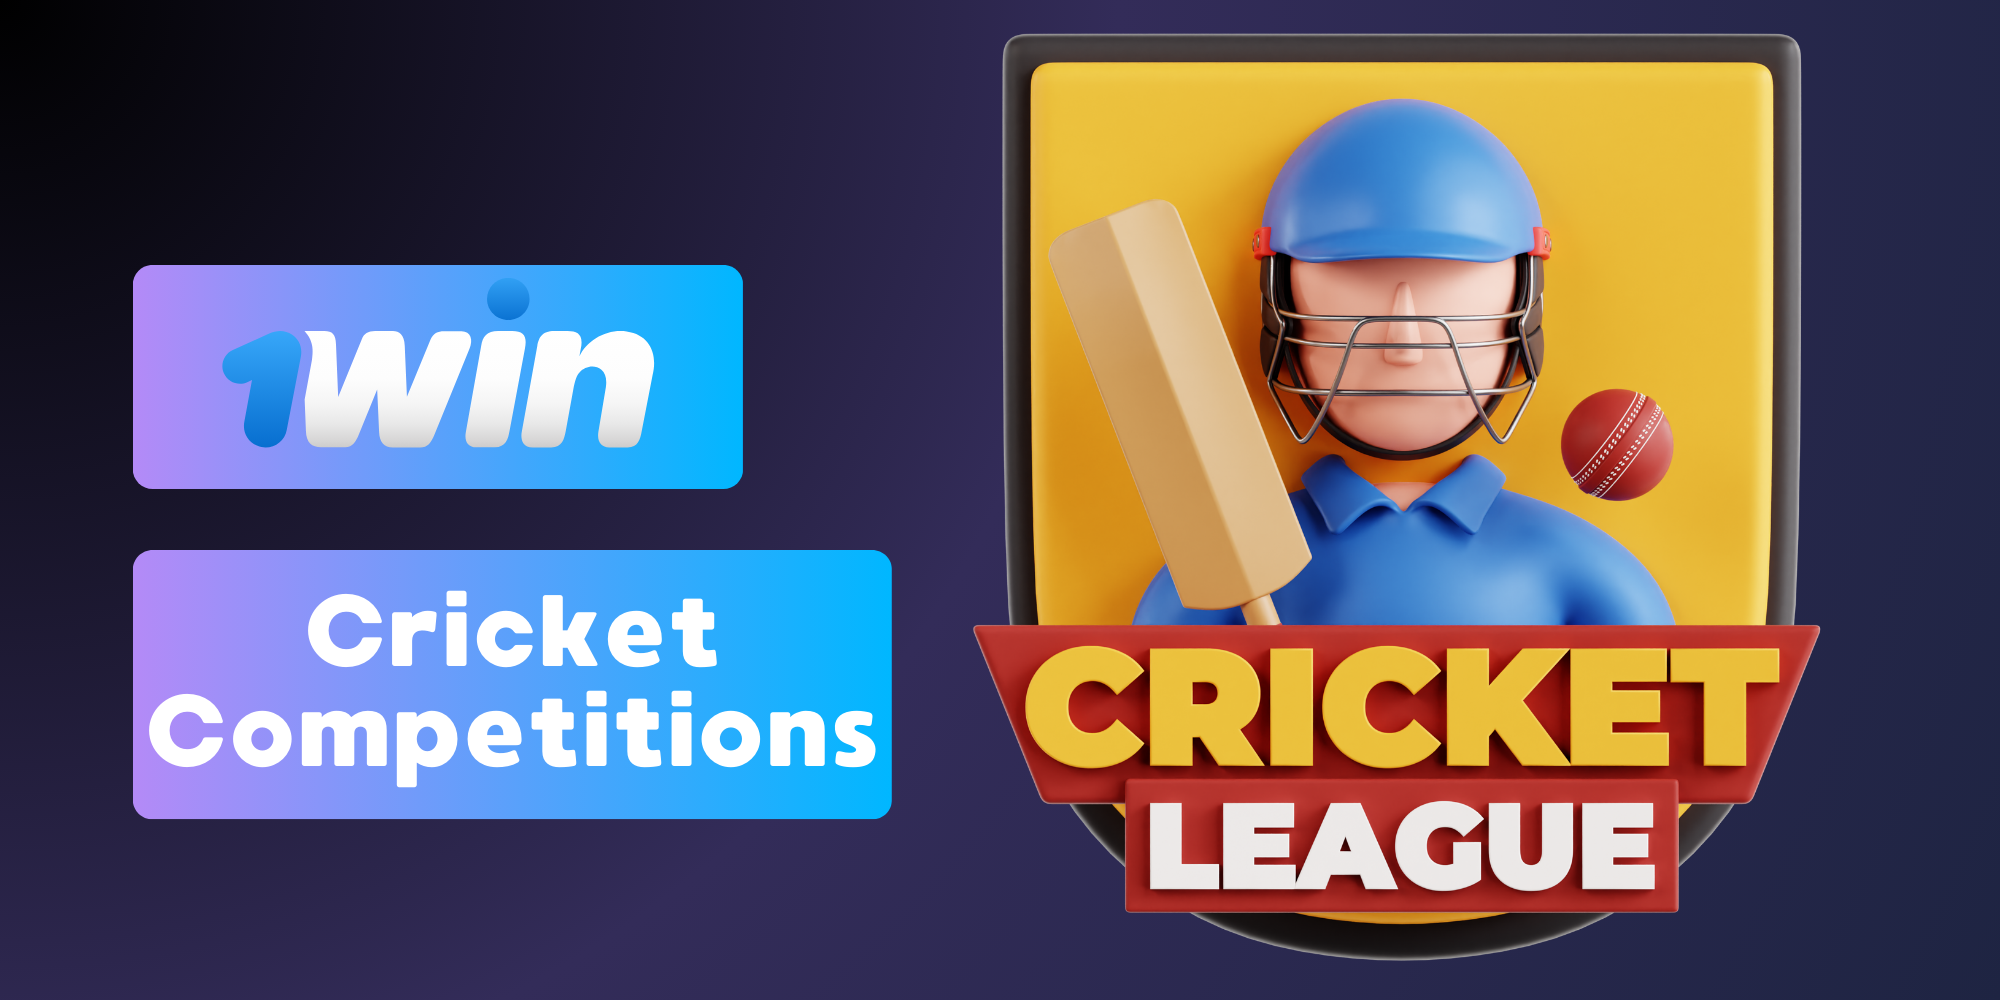 If you are interested in cricket, the 1win betting site provides you with a wide range of options